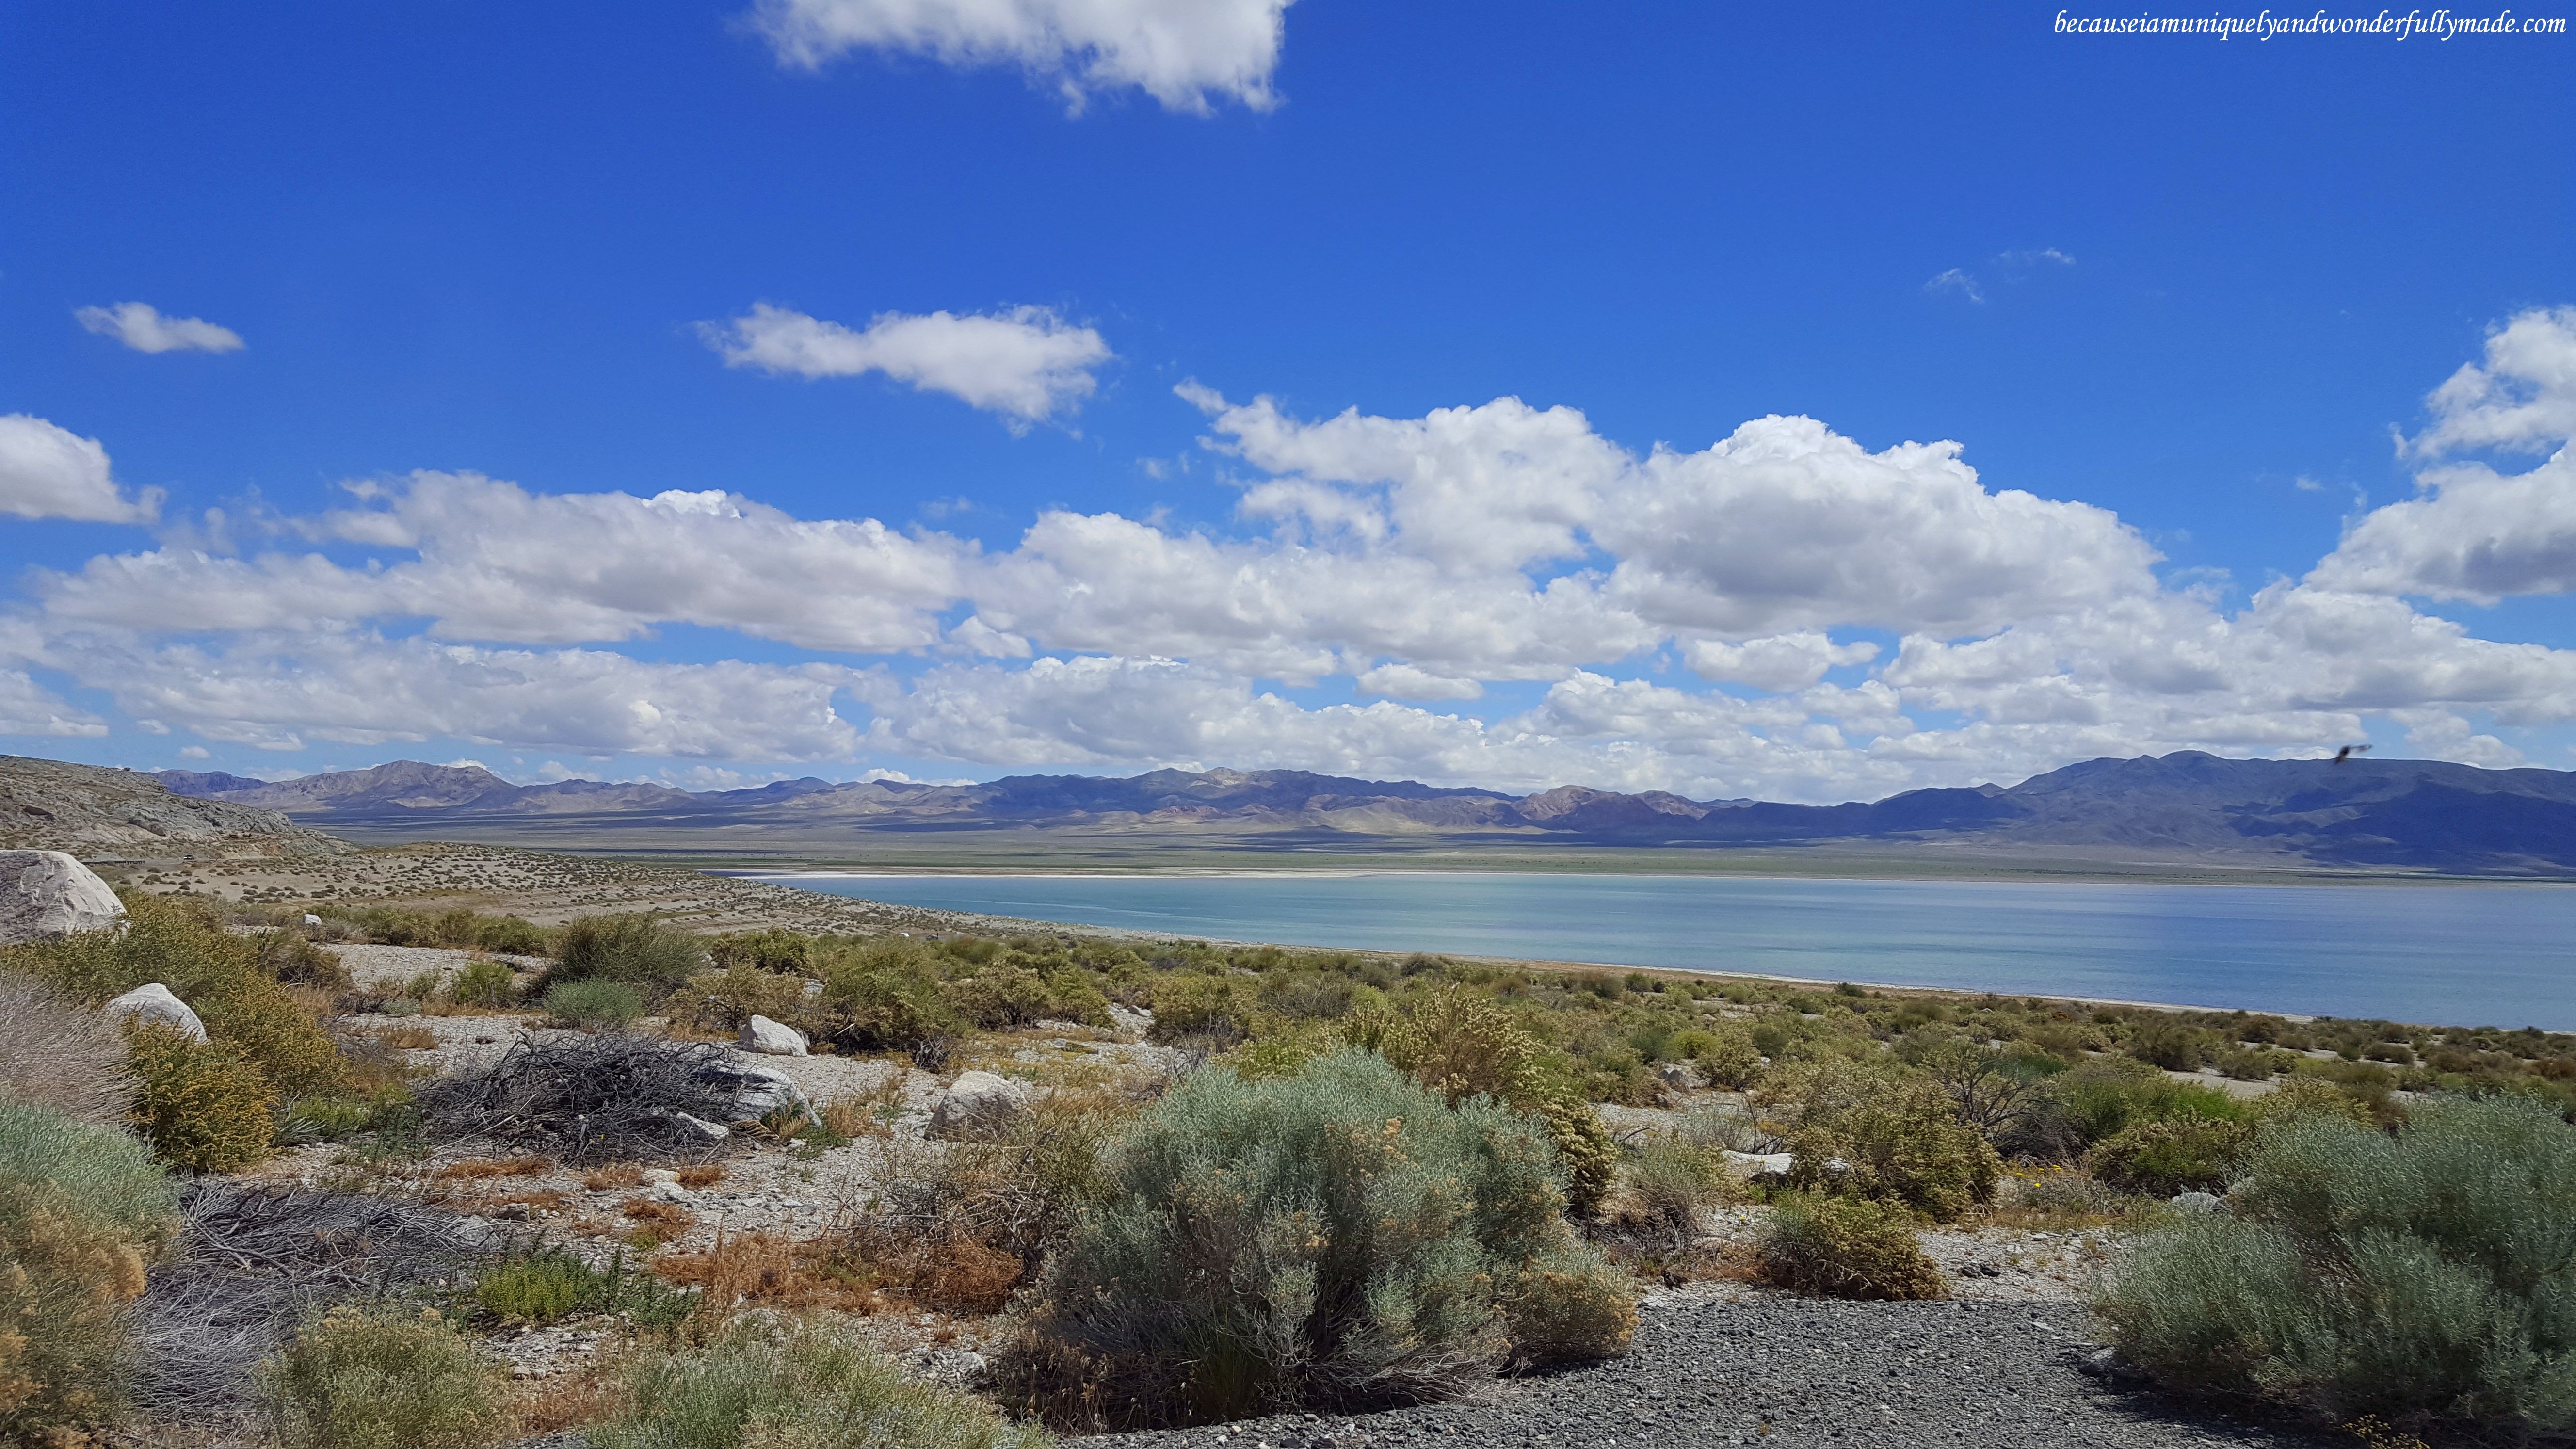 Walker Lake in Nevada is a terminal lake, meaning it has no natural outlet, except absorption and evaporation.